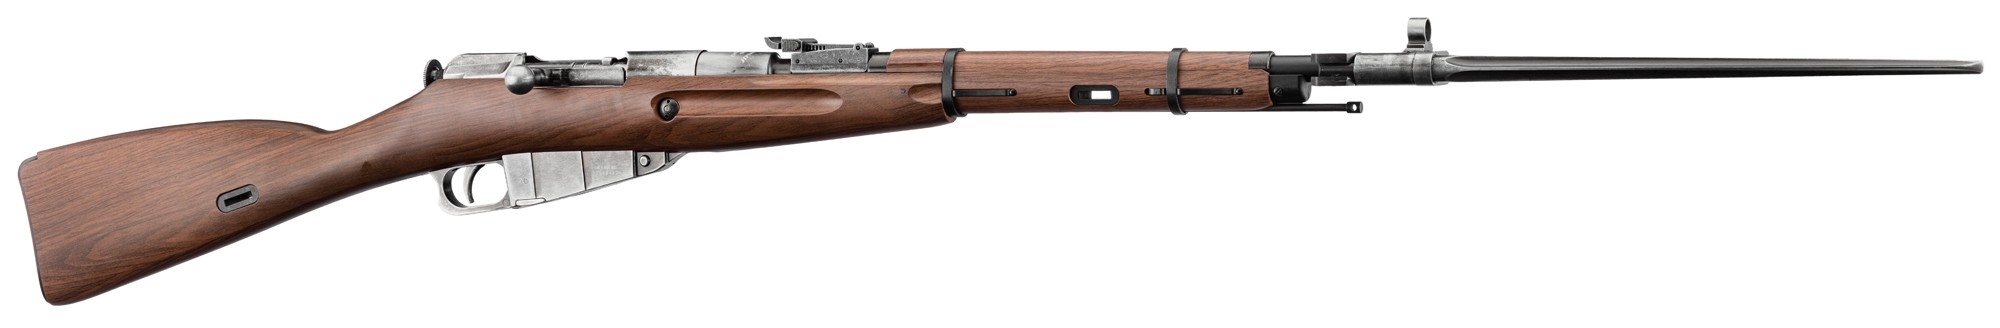 MOSIN-NAGANT M44 CO2 OVERLORD WWII SERIES BO MANUFACTURE